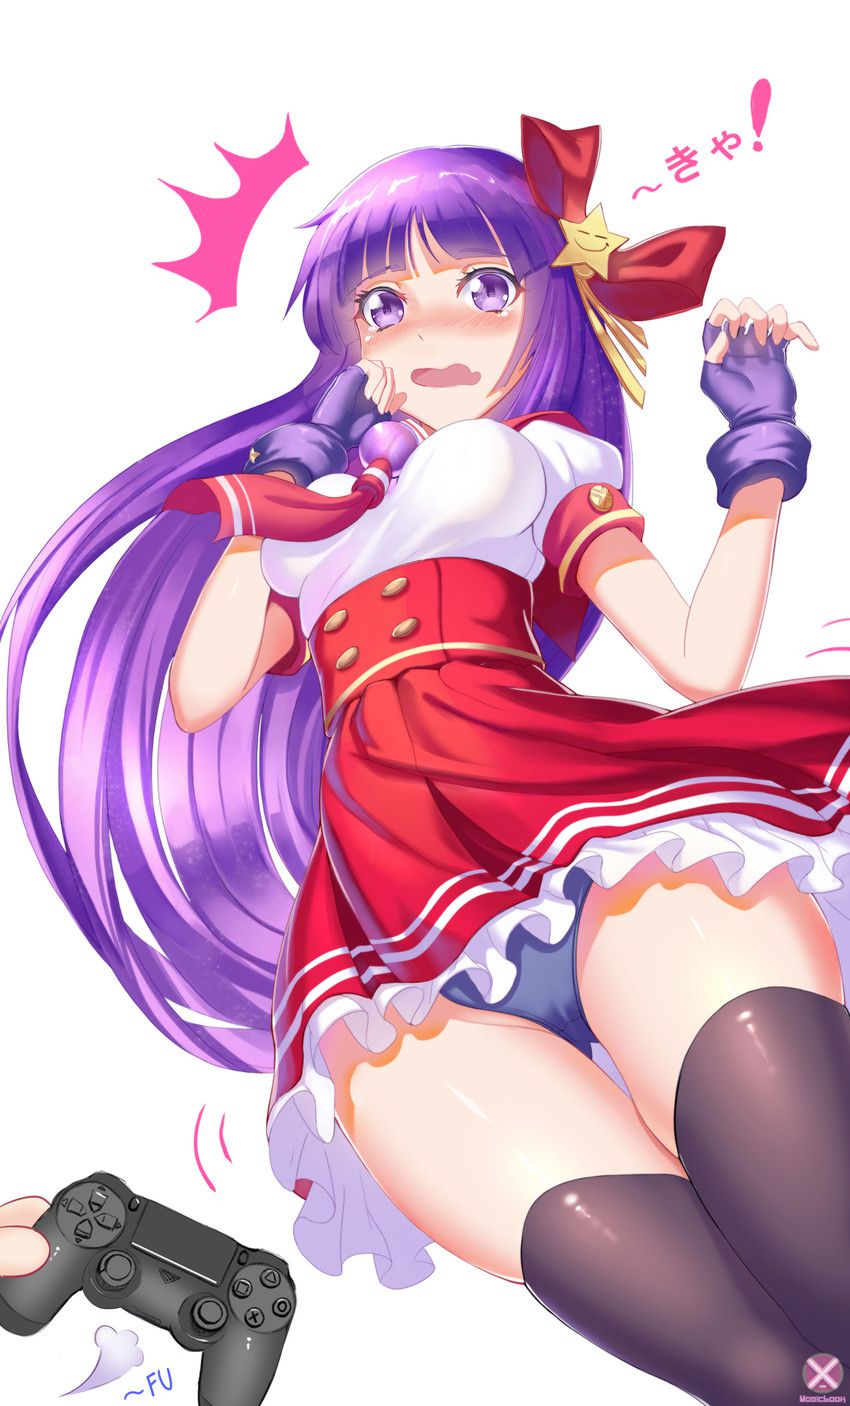 【The King of Fighters】Athena Asamiya's cute picture furnace image summary 16